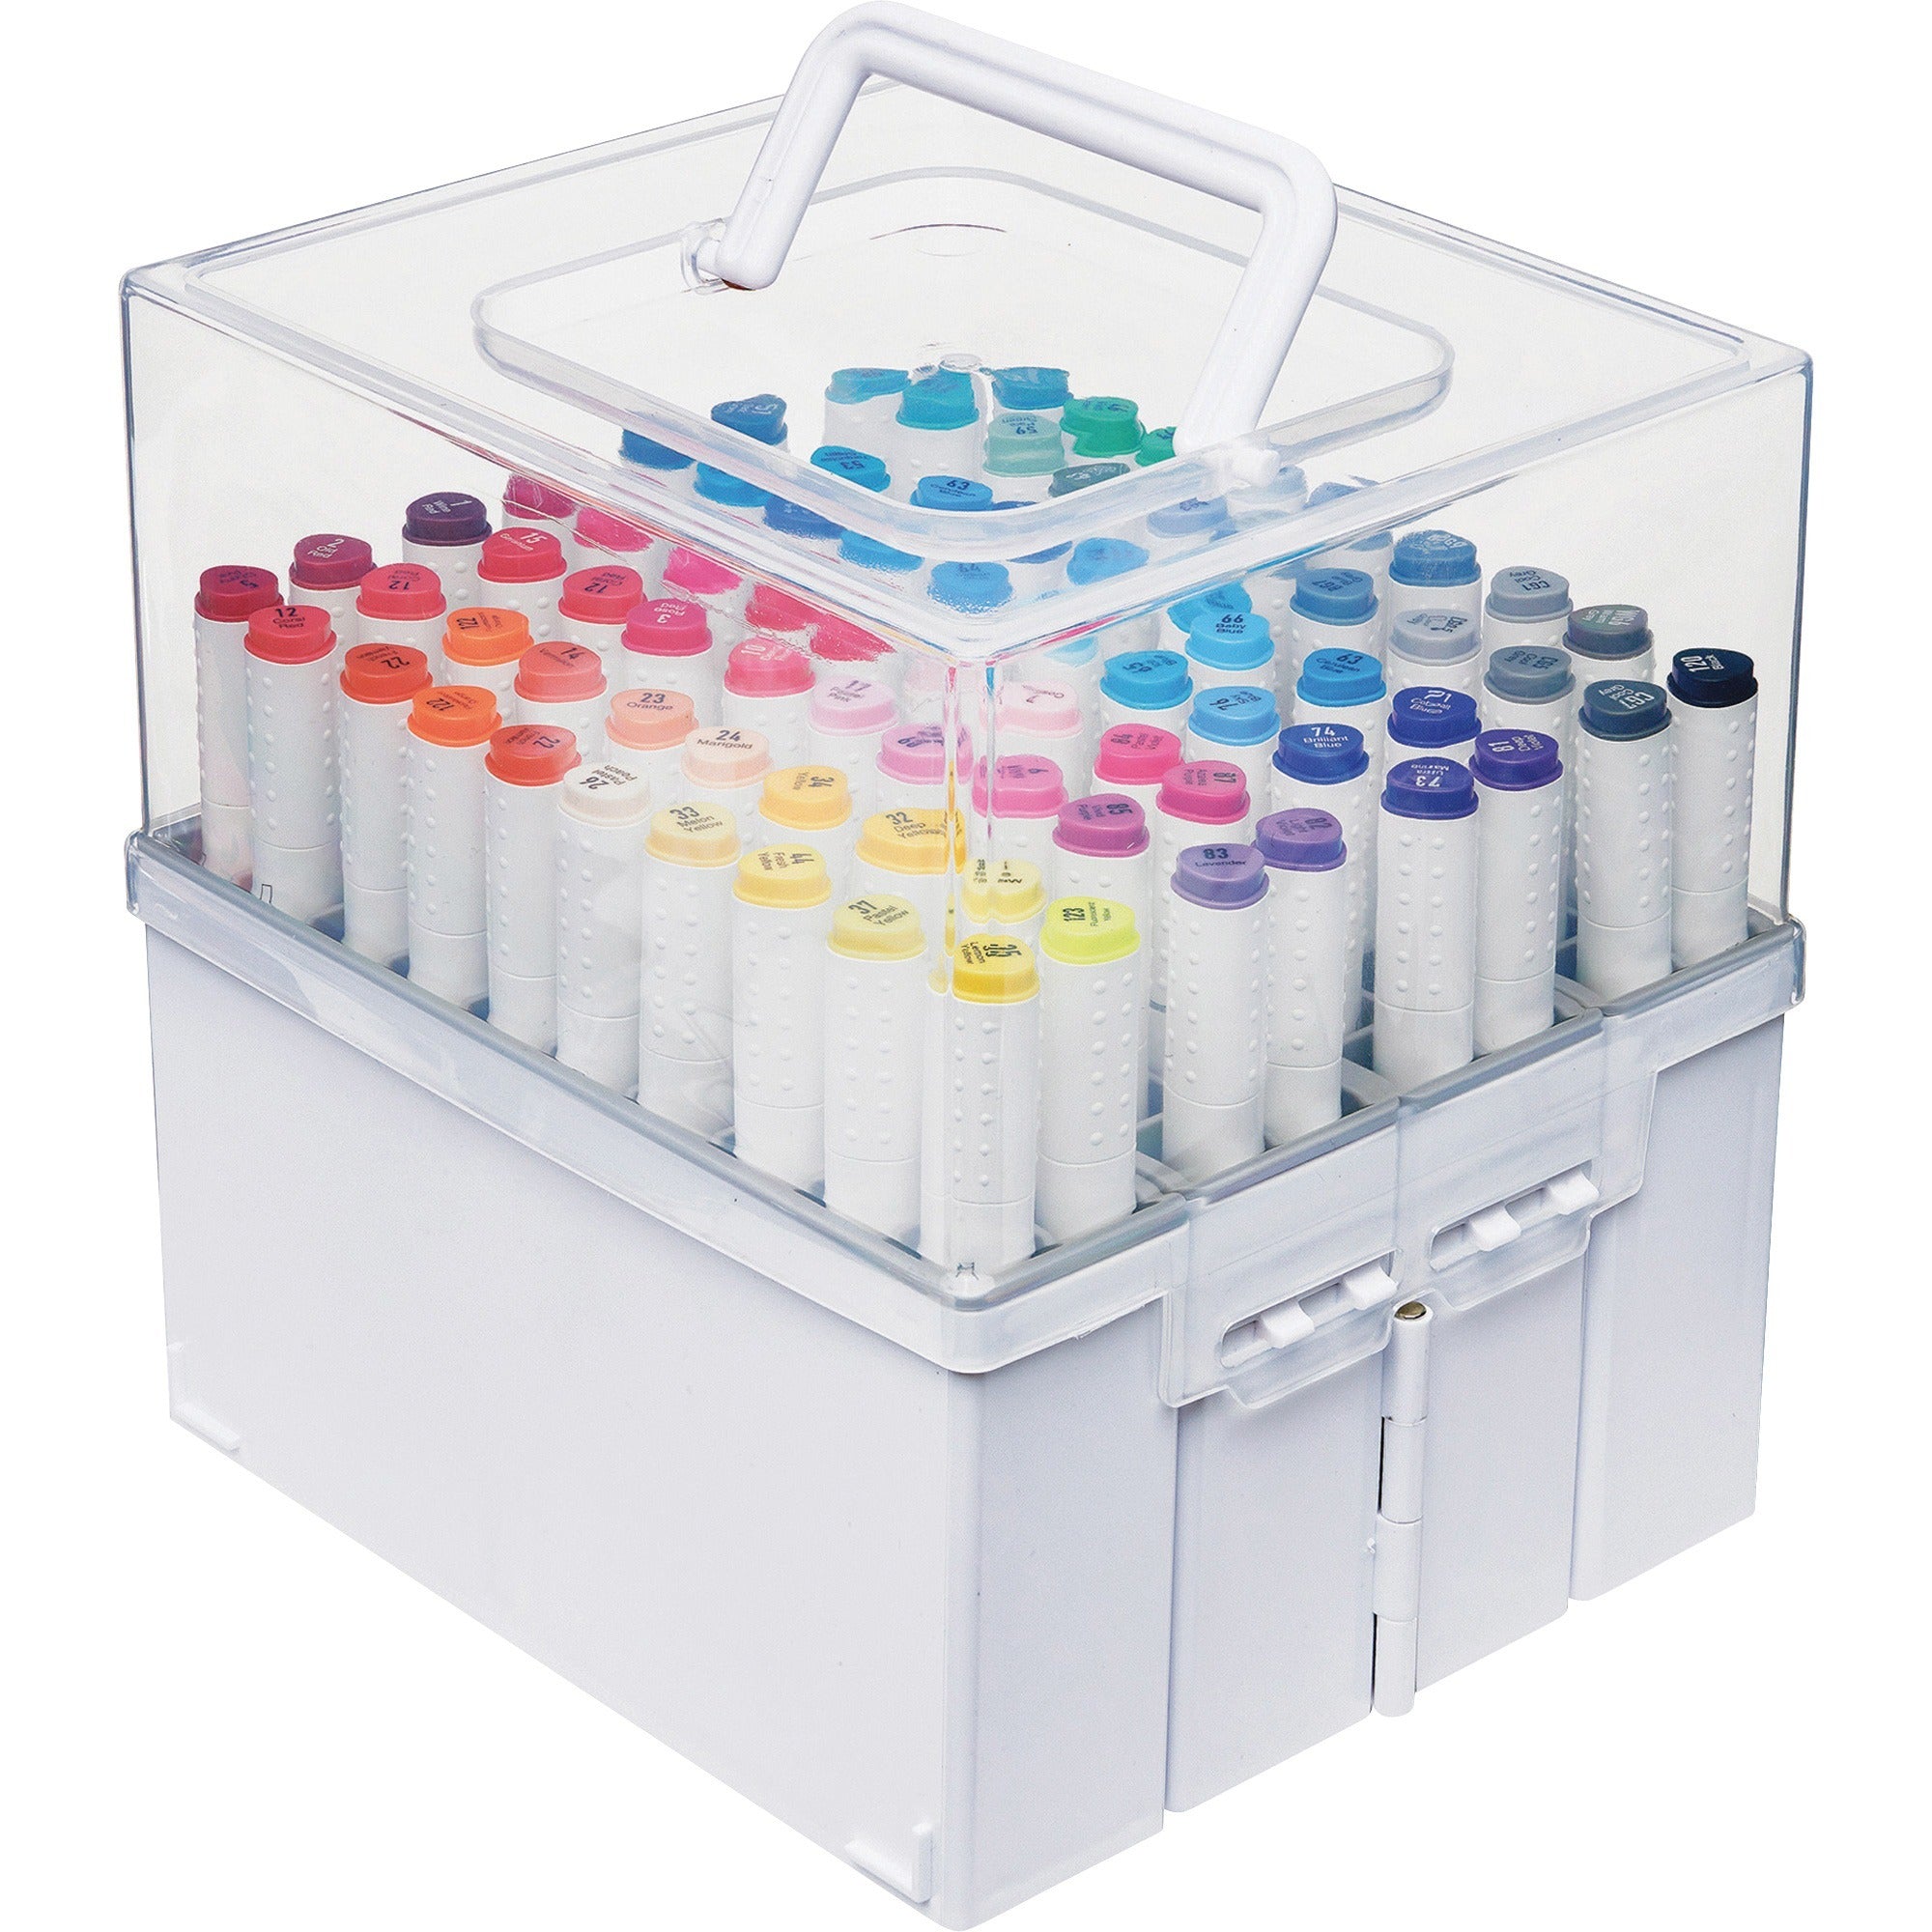 deflecto-expandable-marker-accordion-organizer-external-dimensions-86-width-x-75-depth-x-85-height-snap-in-lid-closure-clear-white-for-pen-marker-1-each_def29133cr - 1